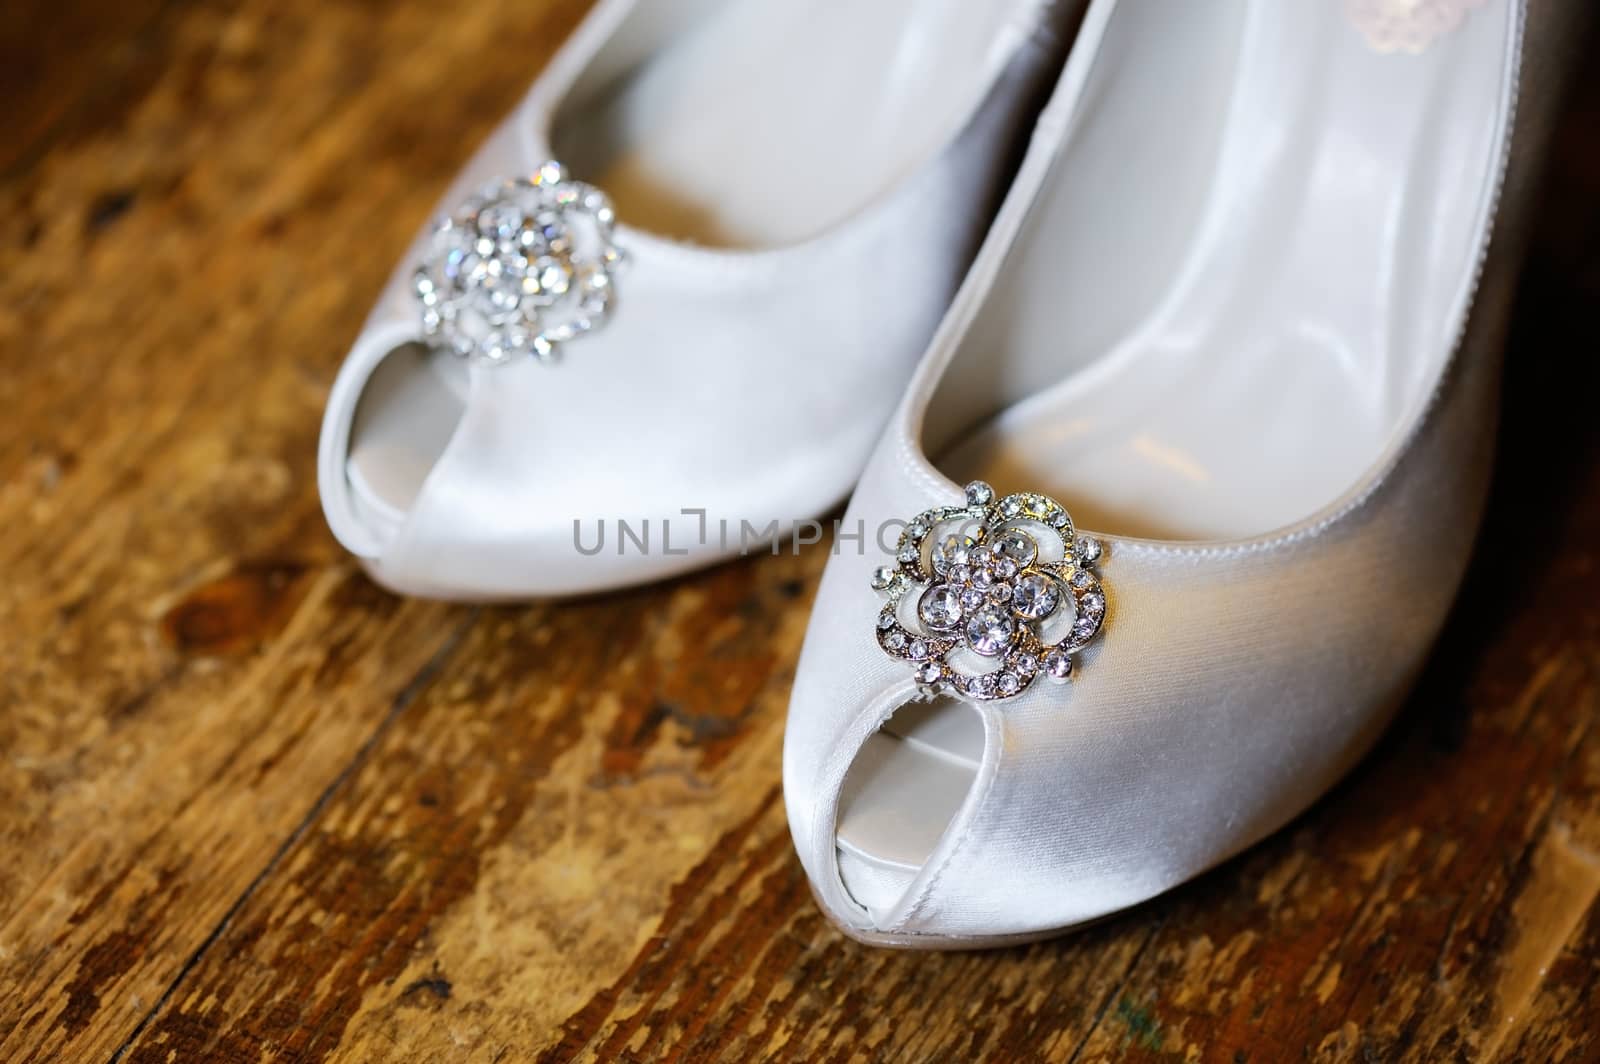 Closeup of brides shoes showing detail on wedding day